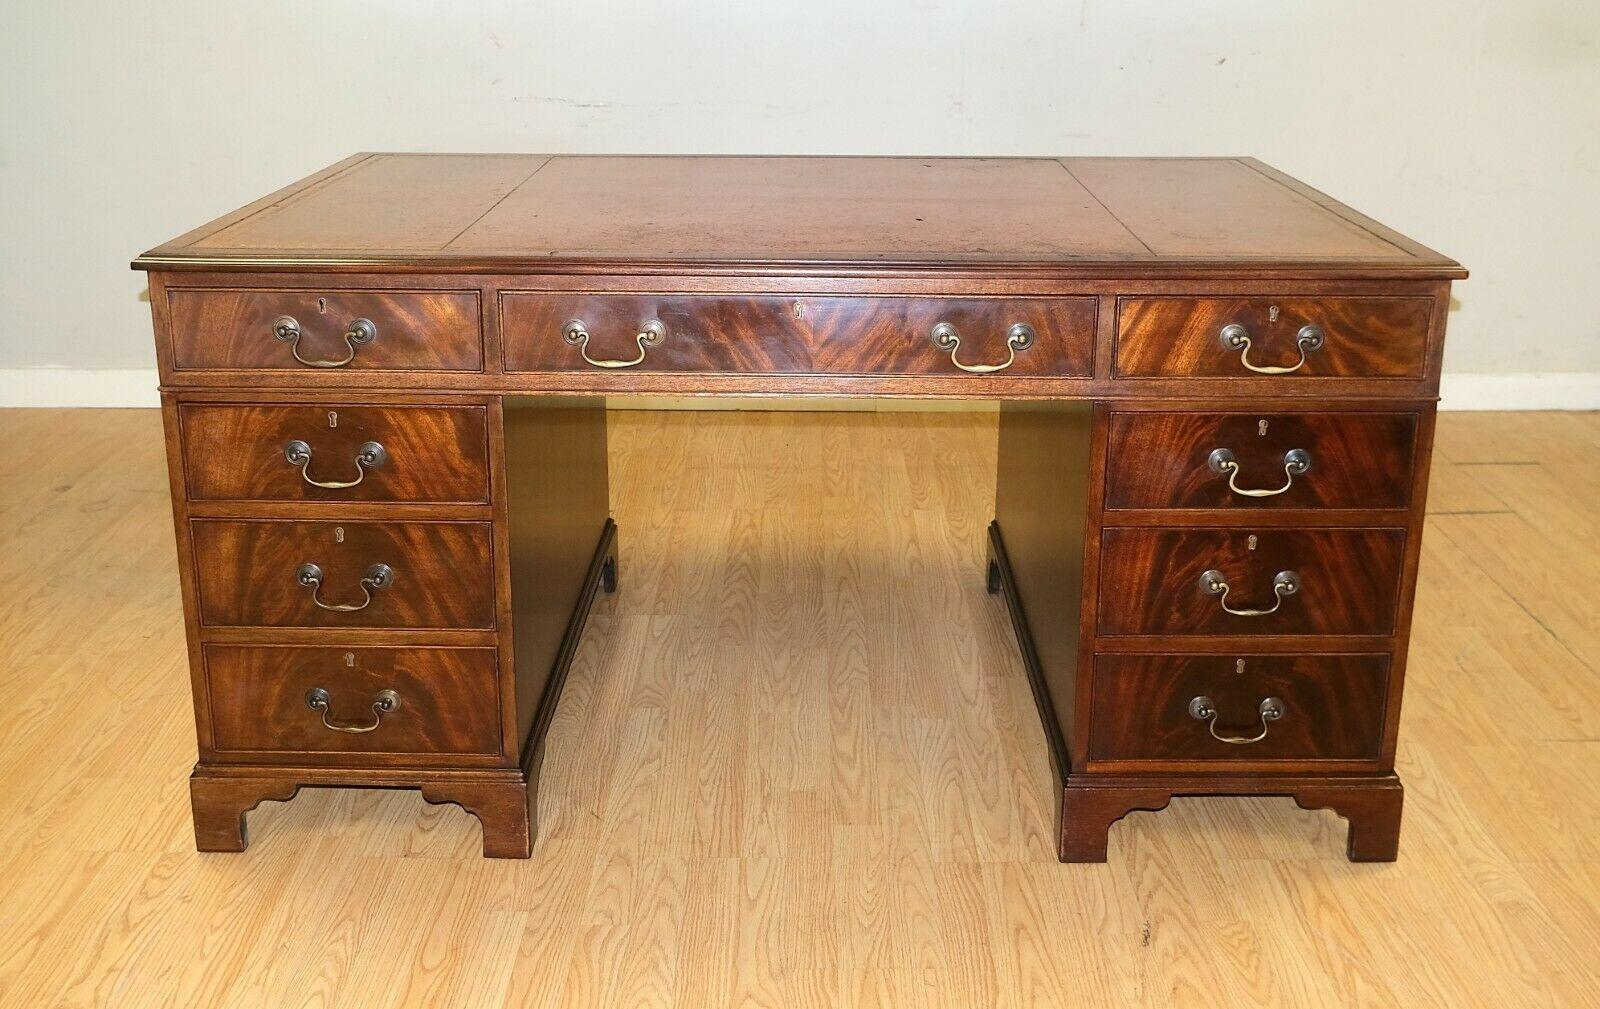 We are delighted to offer for sale this lovely Vintage twin pedestal partner desk with keys and brown leather top.

This solid and well made desk offers you twelve drawers and a pair of good size cupboards. This type of desk was naturally designed